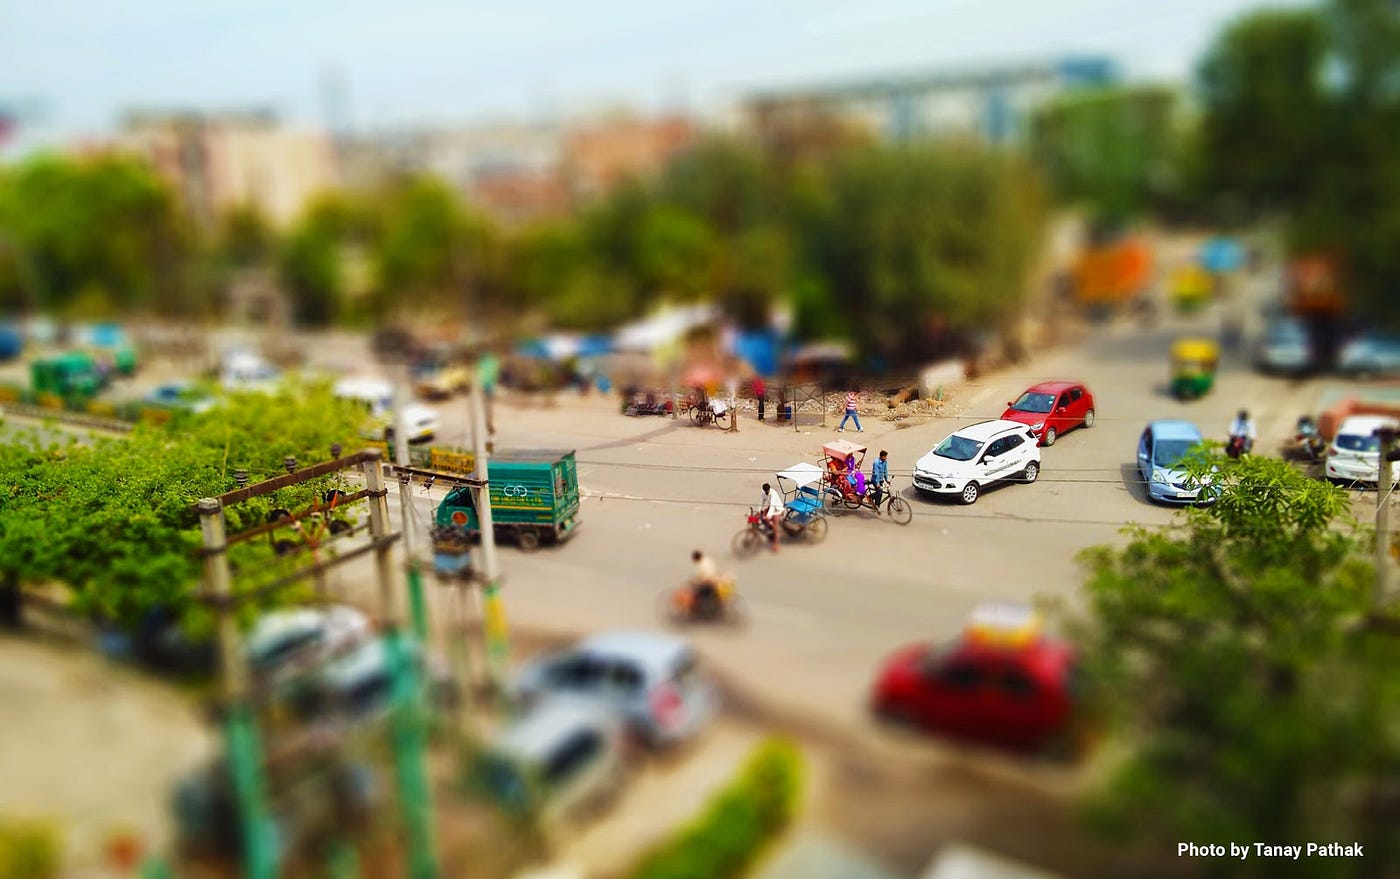 How to Create Tilt Shift Photos with iPhone? (Additional Method Included) -  Fotor's Blog